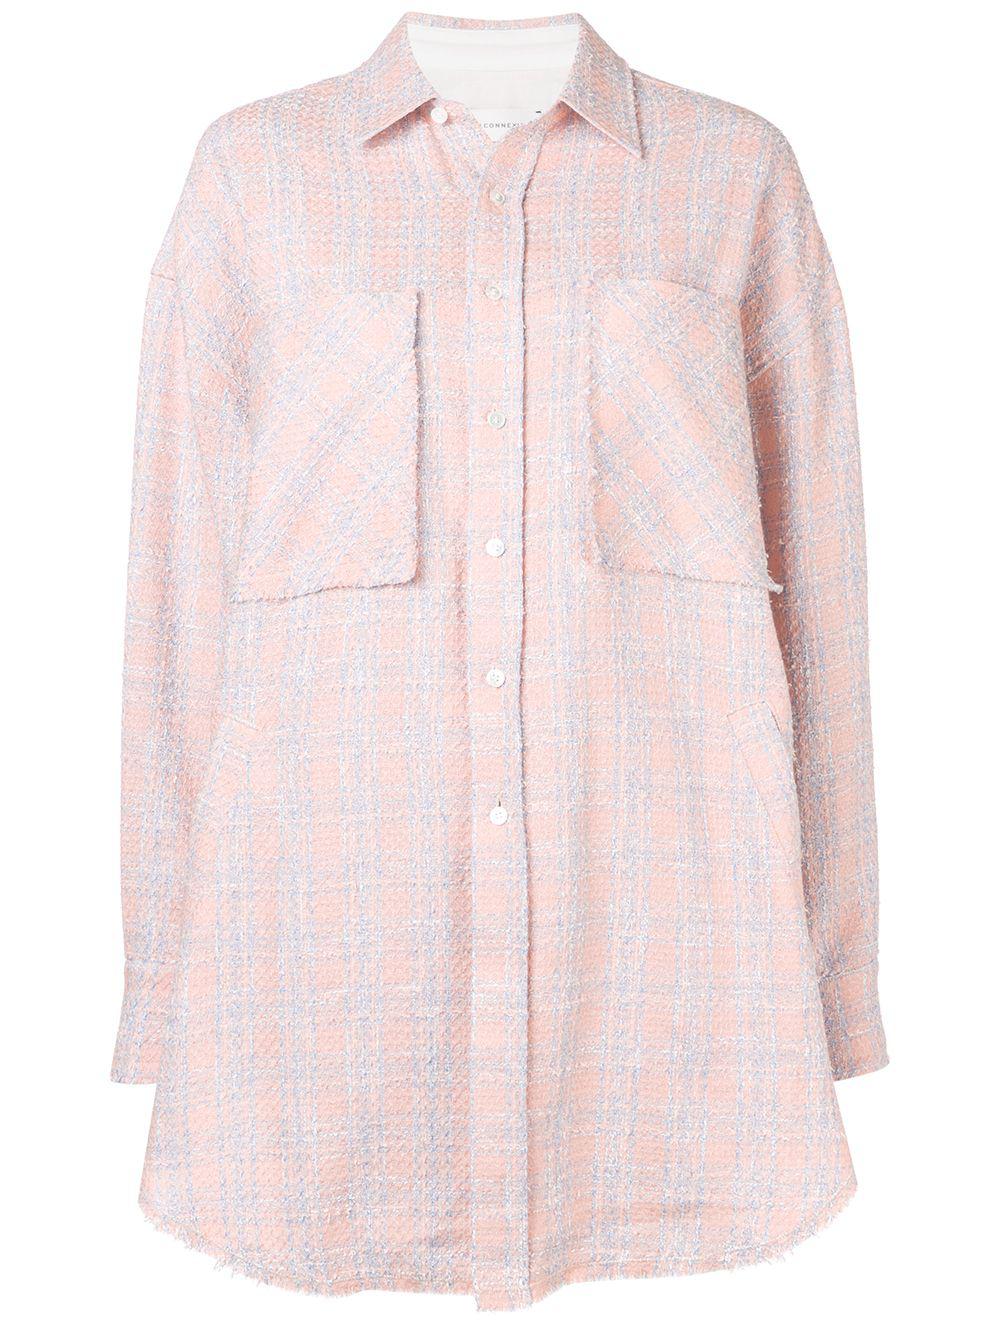 oversized check shirt by FAITH CONNEXION